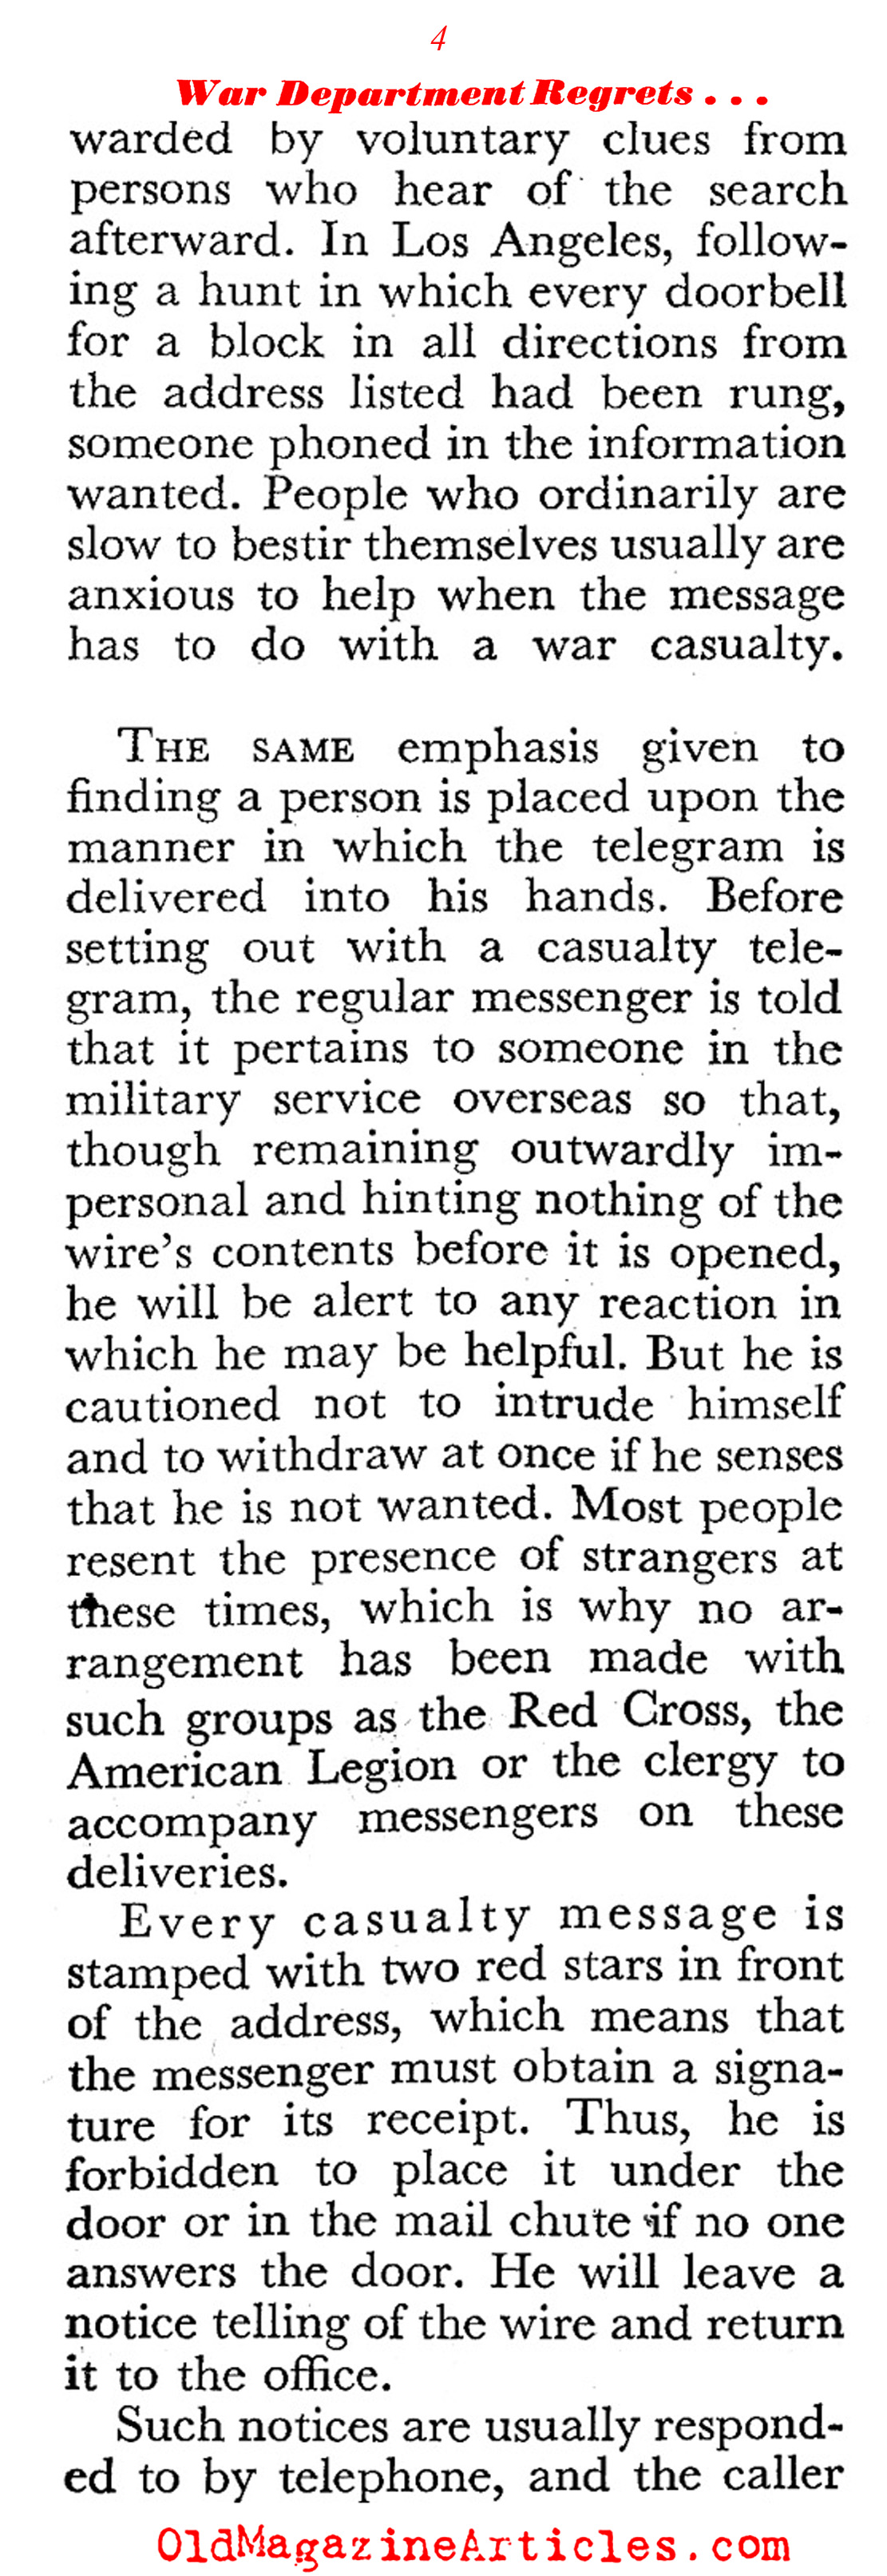 The Most Dreaded Telegram on the Home Front (Coronet Magazine, 1944)